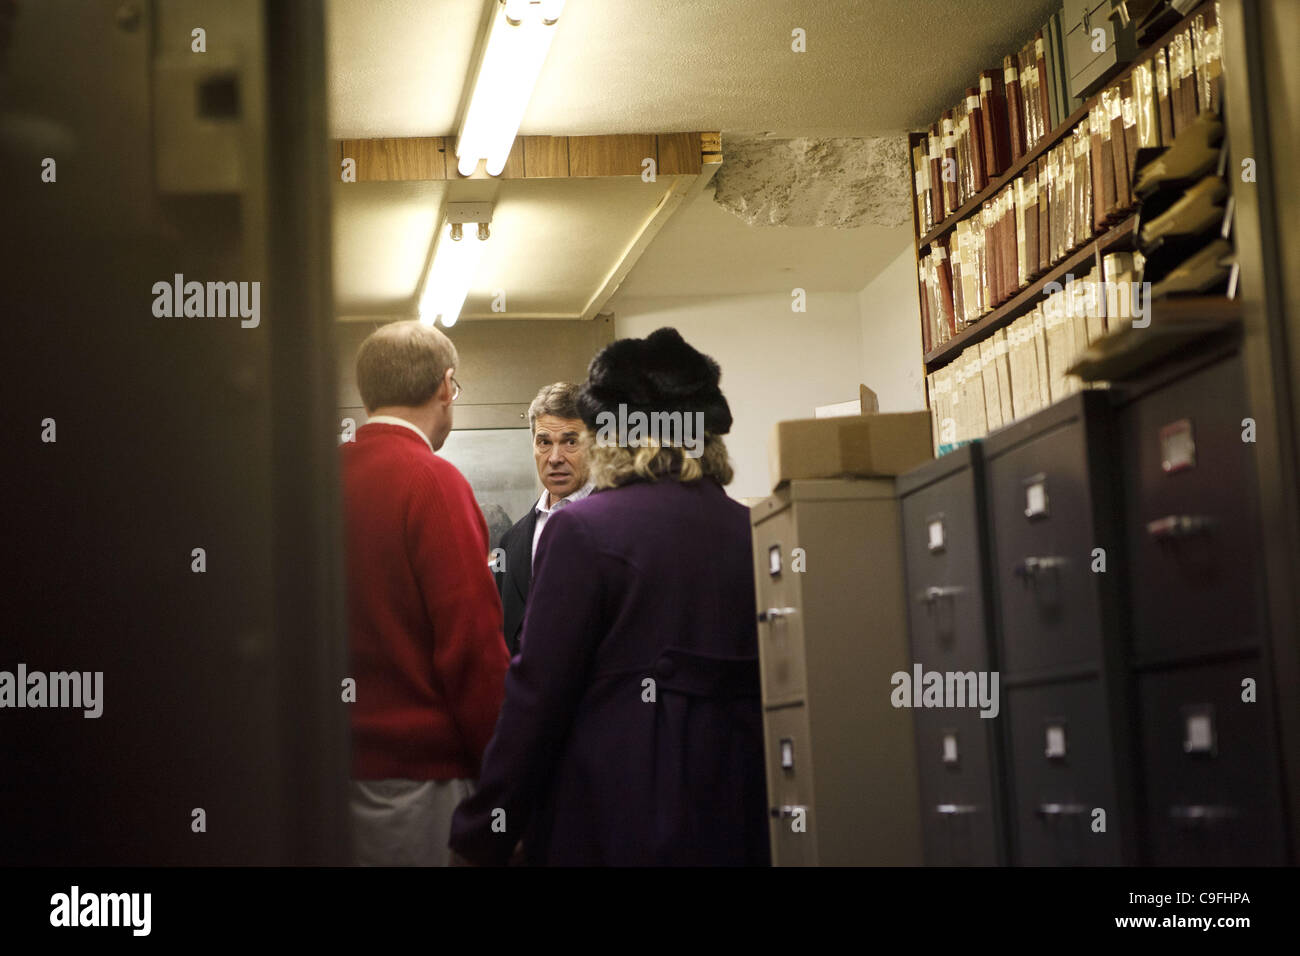 Dec. 14, 2011 - Harlan, Iowa, U.S. - Republican presidential candidate Texas Gov. Rick Perry talks with small business owner Randy Ouren and Dawn Cundiff of the Shelby County Chamber of Commerce in an old bank vault used to maintain property titles and records as he campaigns during a Main Street To Stock Photo